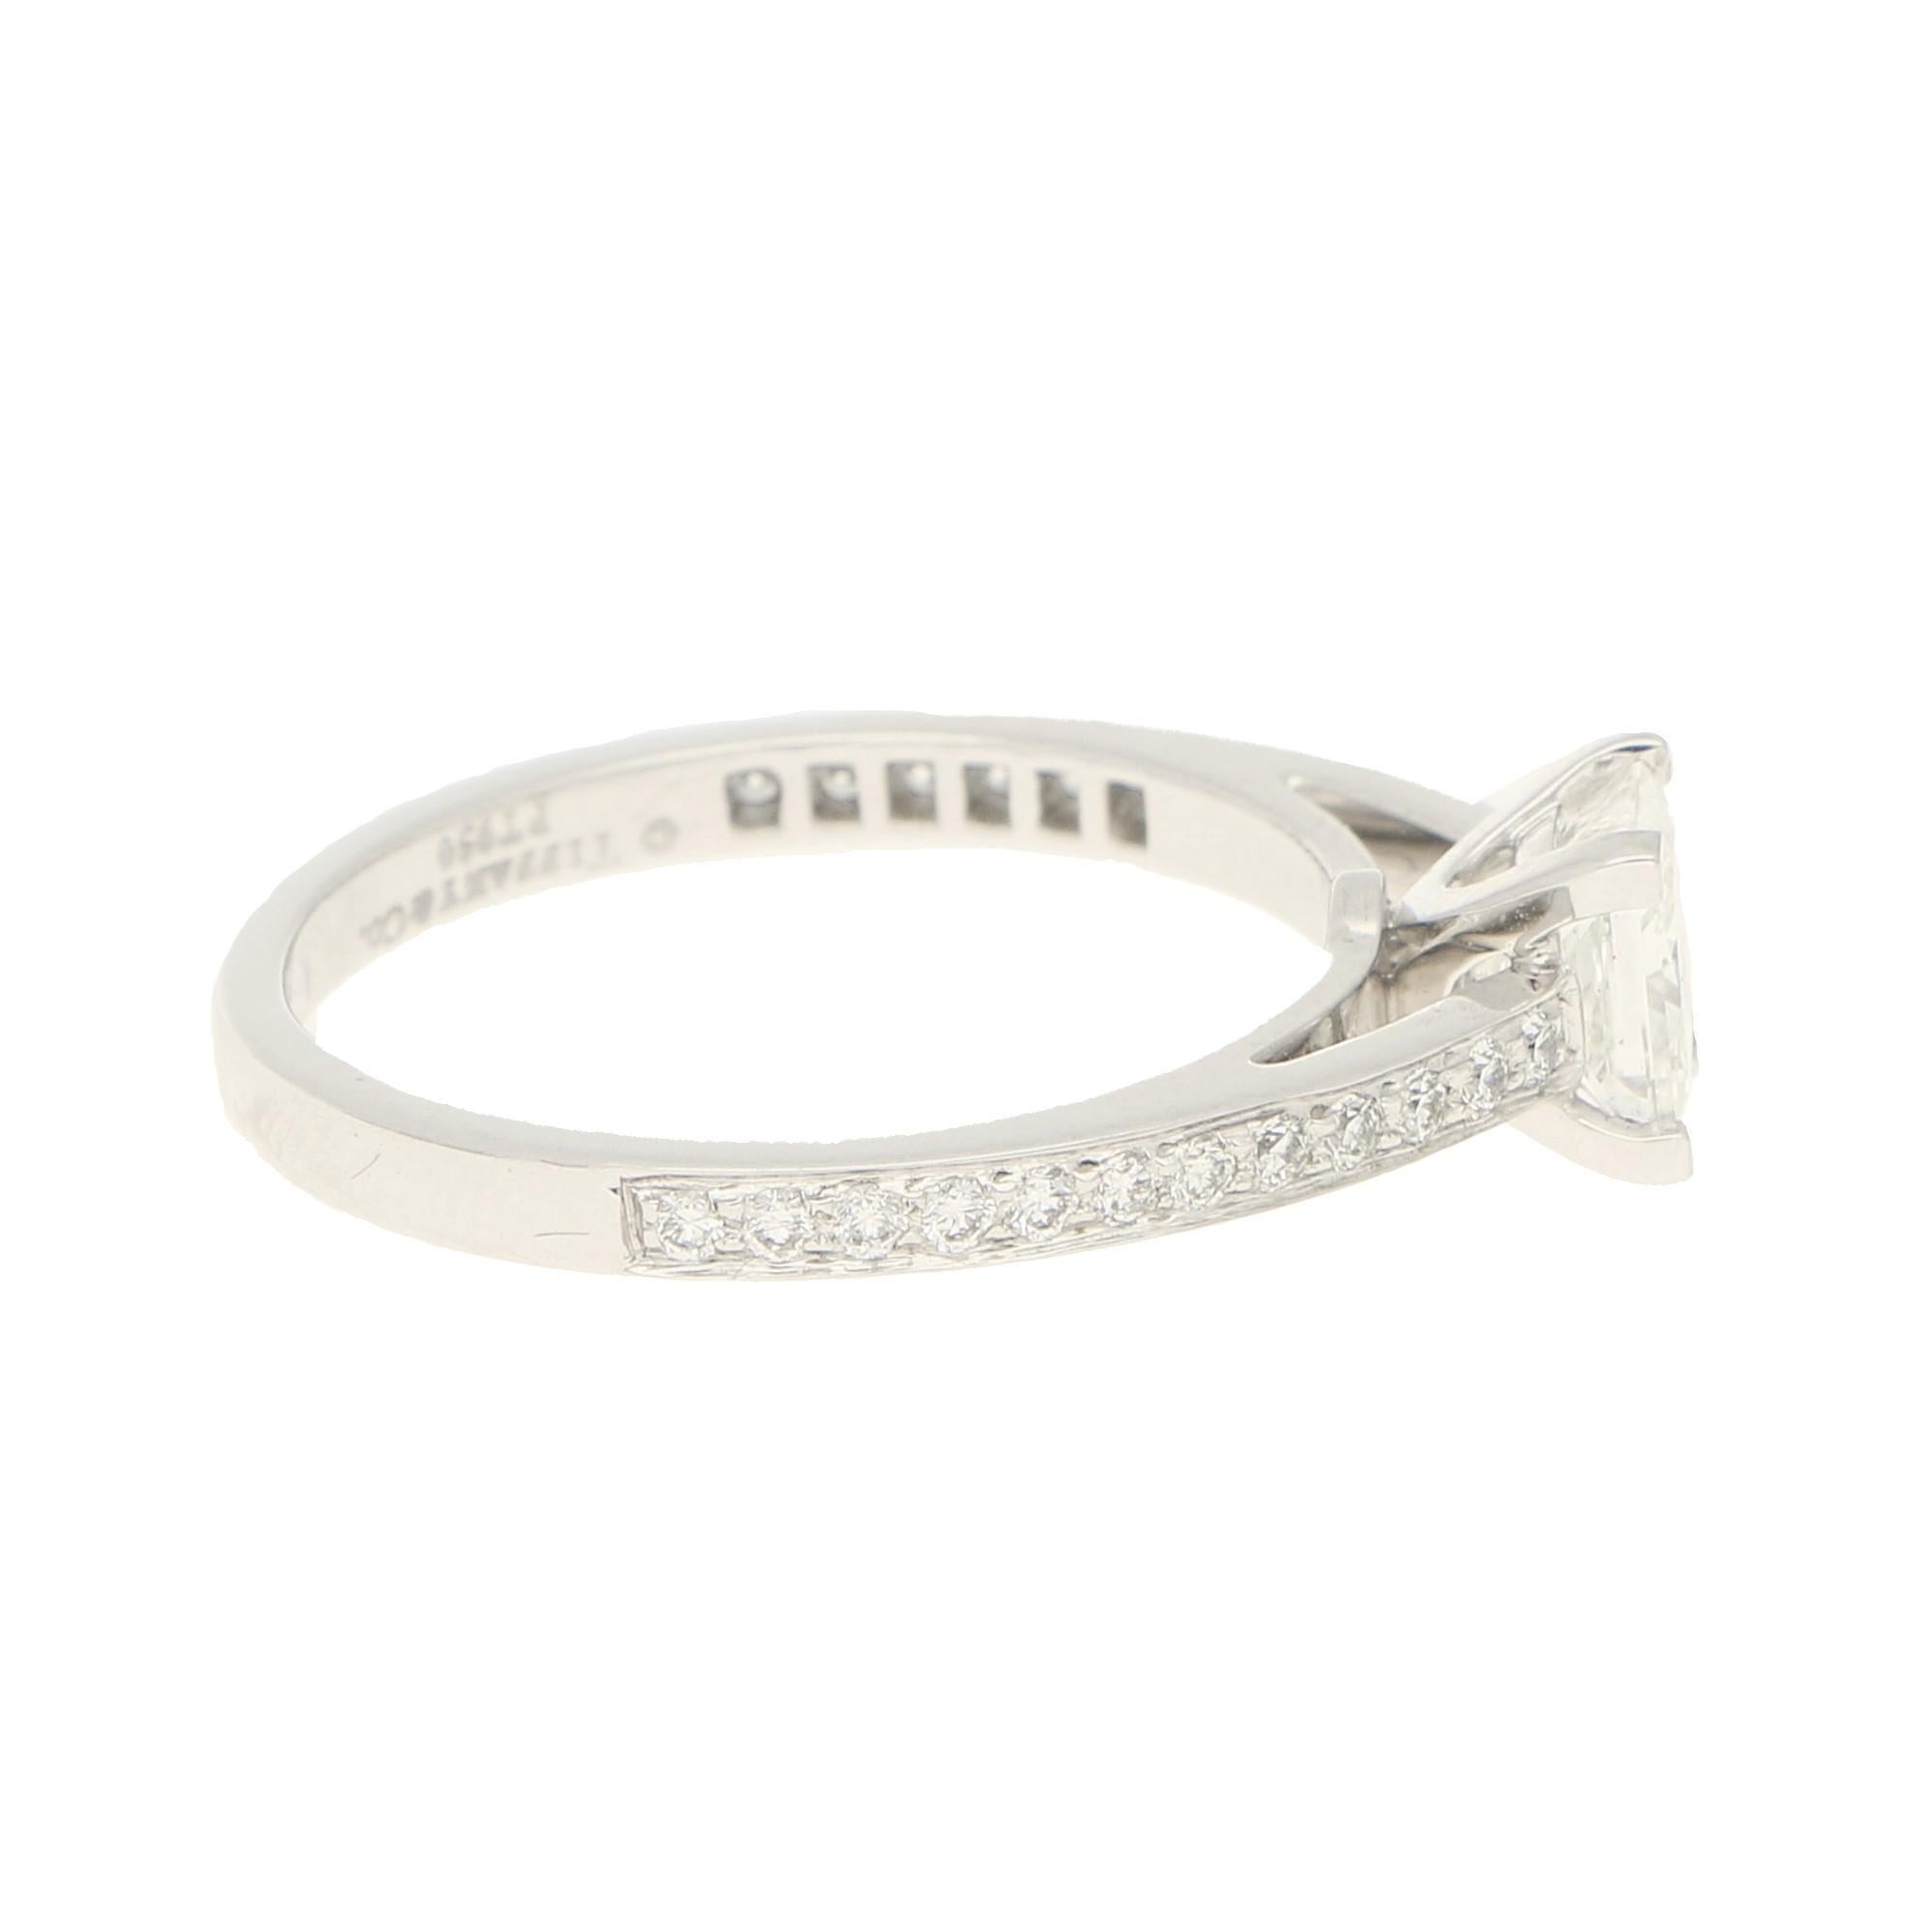 Contemporary Signed Tiffany & Co, 0.72 Carat, Solitaire Diamond 'Grace' Ring Set in Platinum